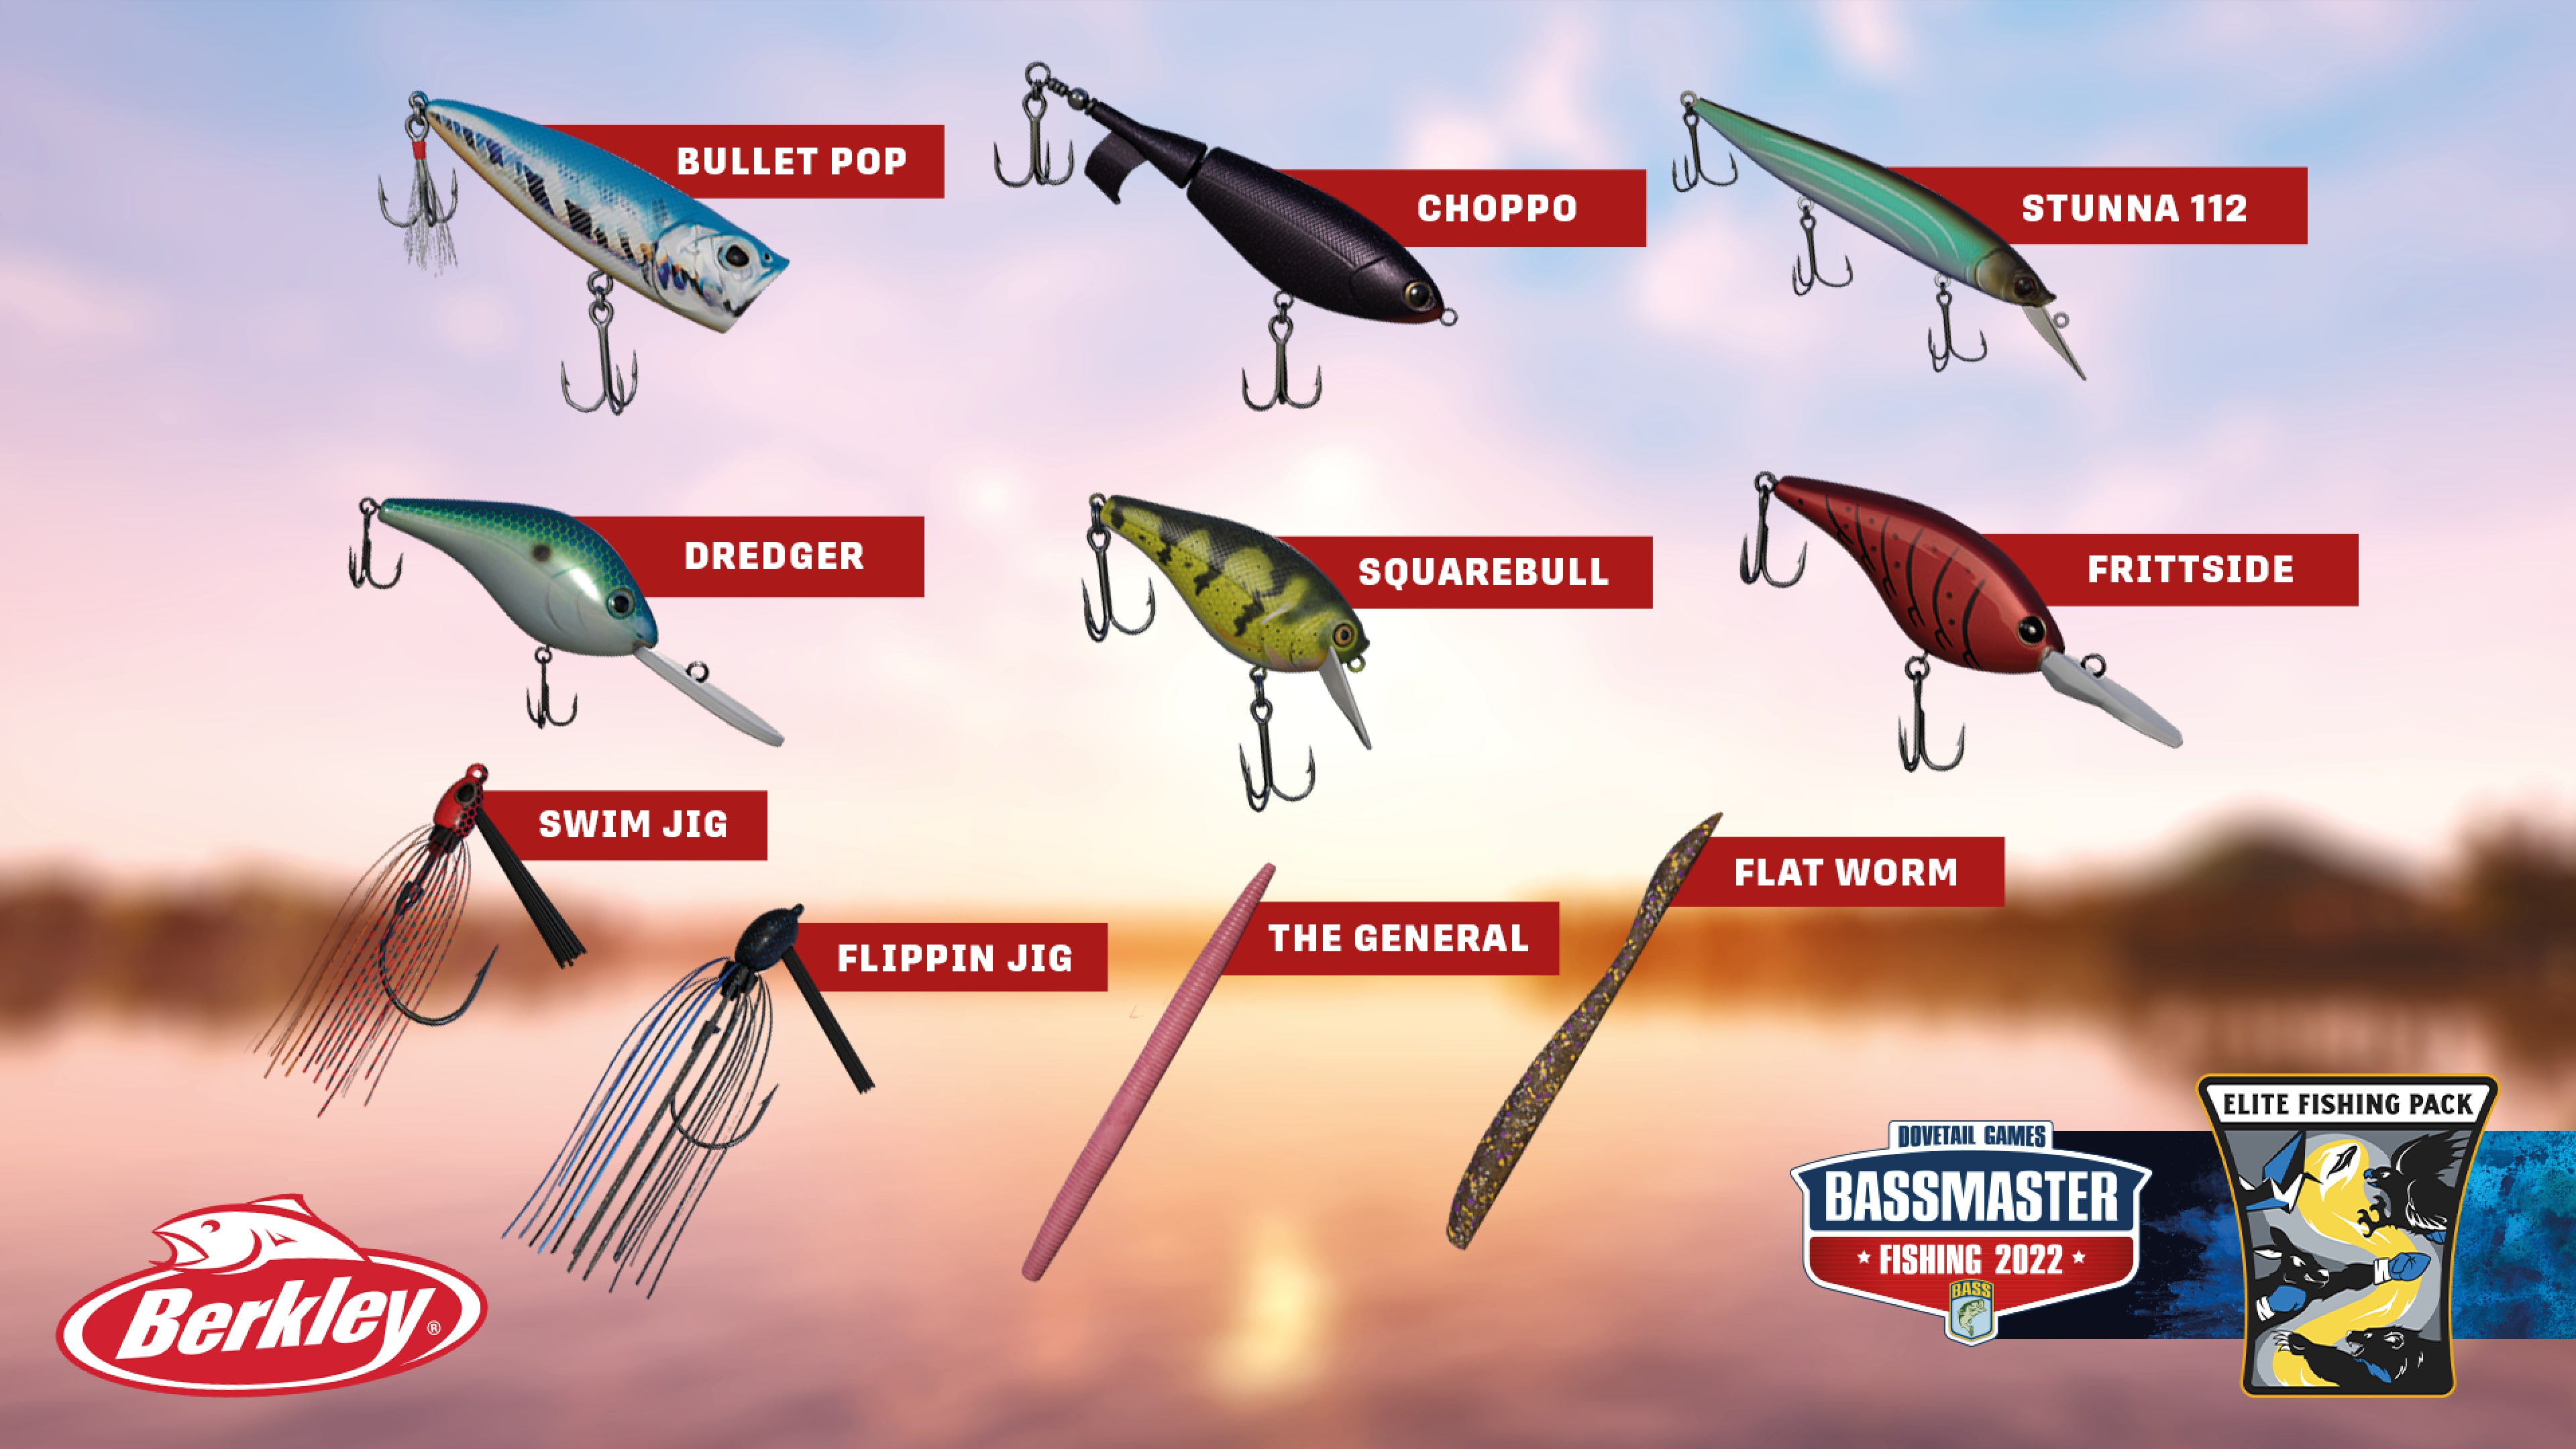 The Best Fishing Packs of 2022